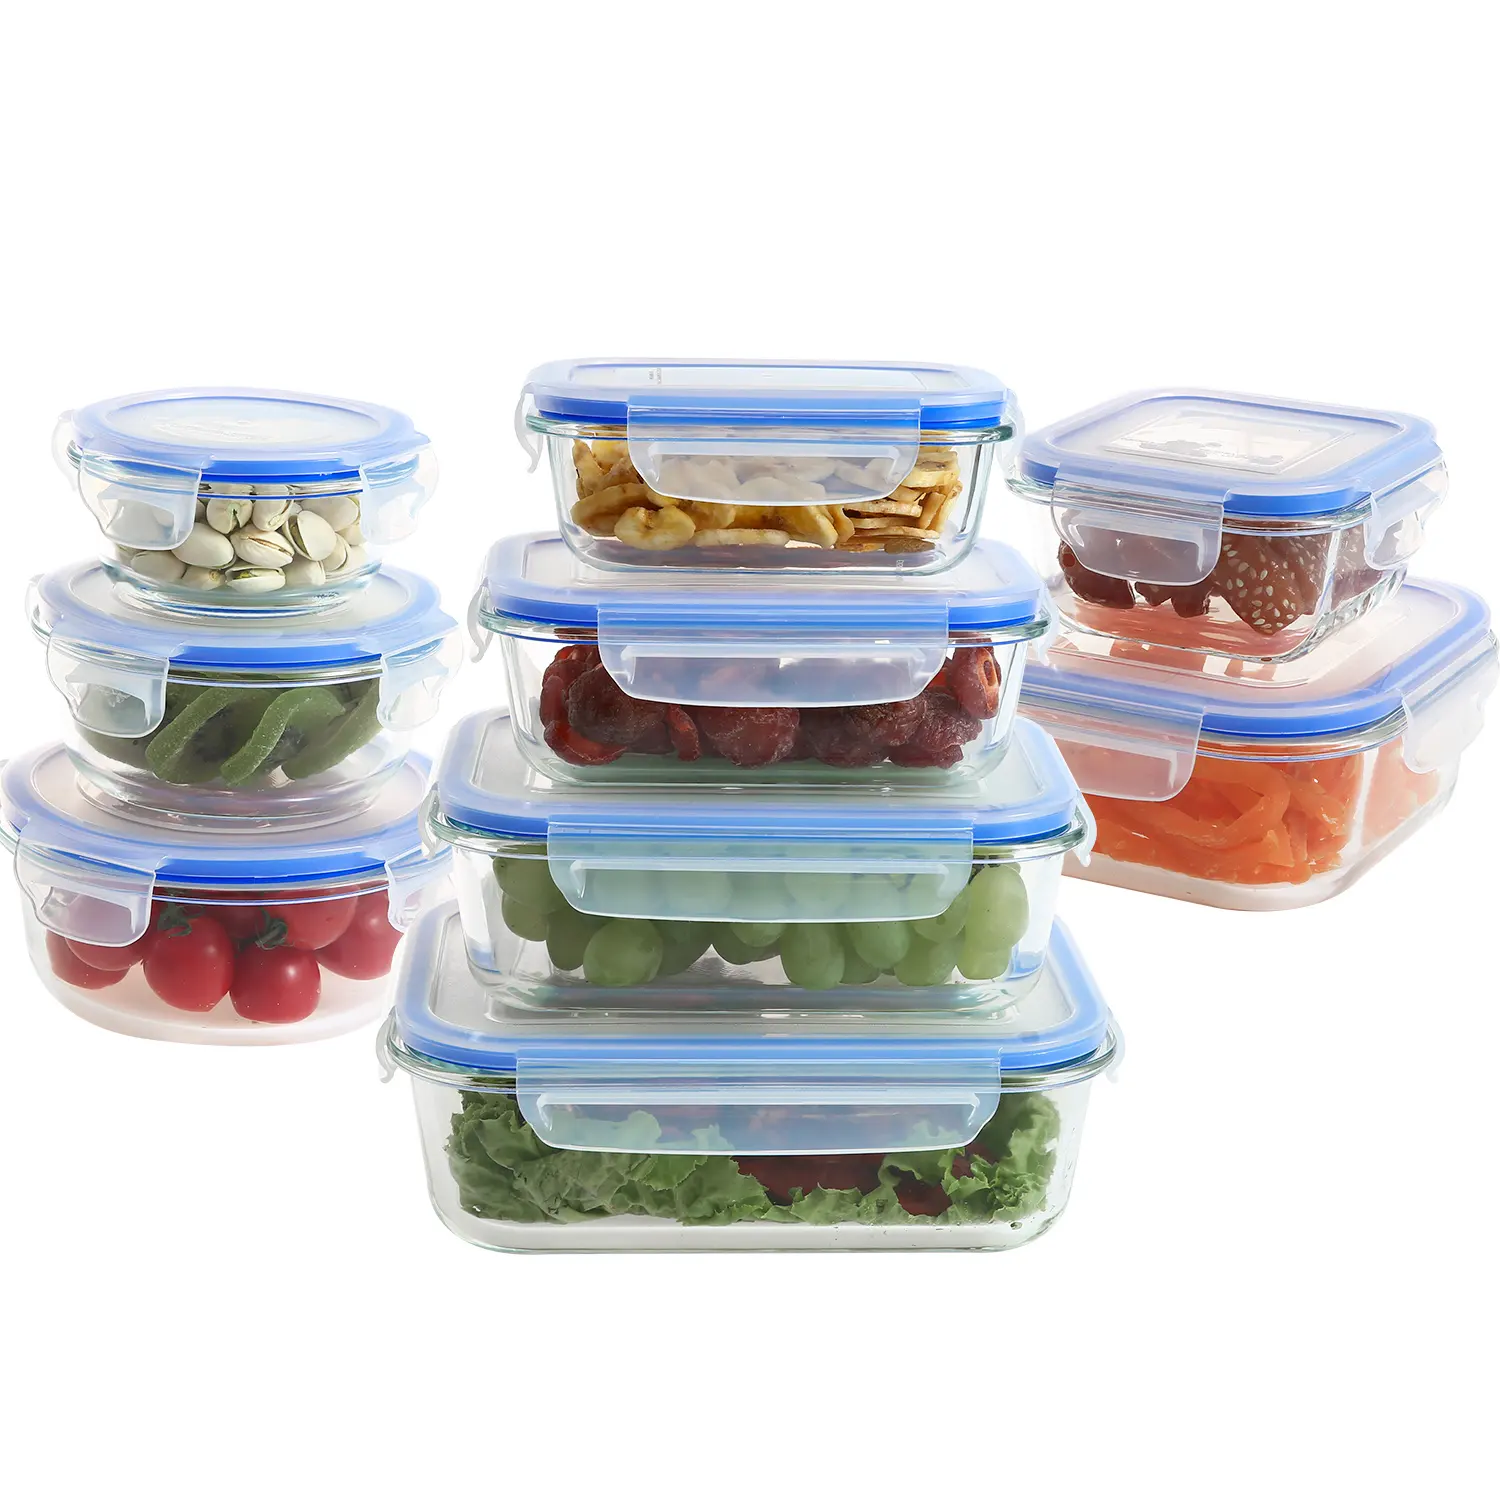 Home Storage Organization 18 pcs glass food container set with plastic lid